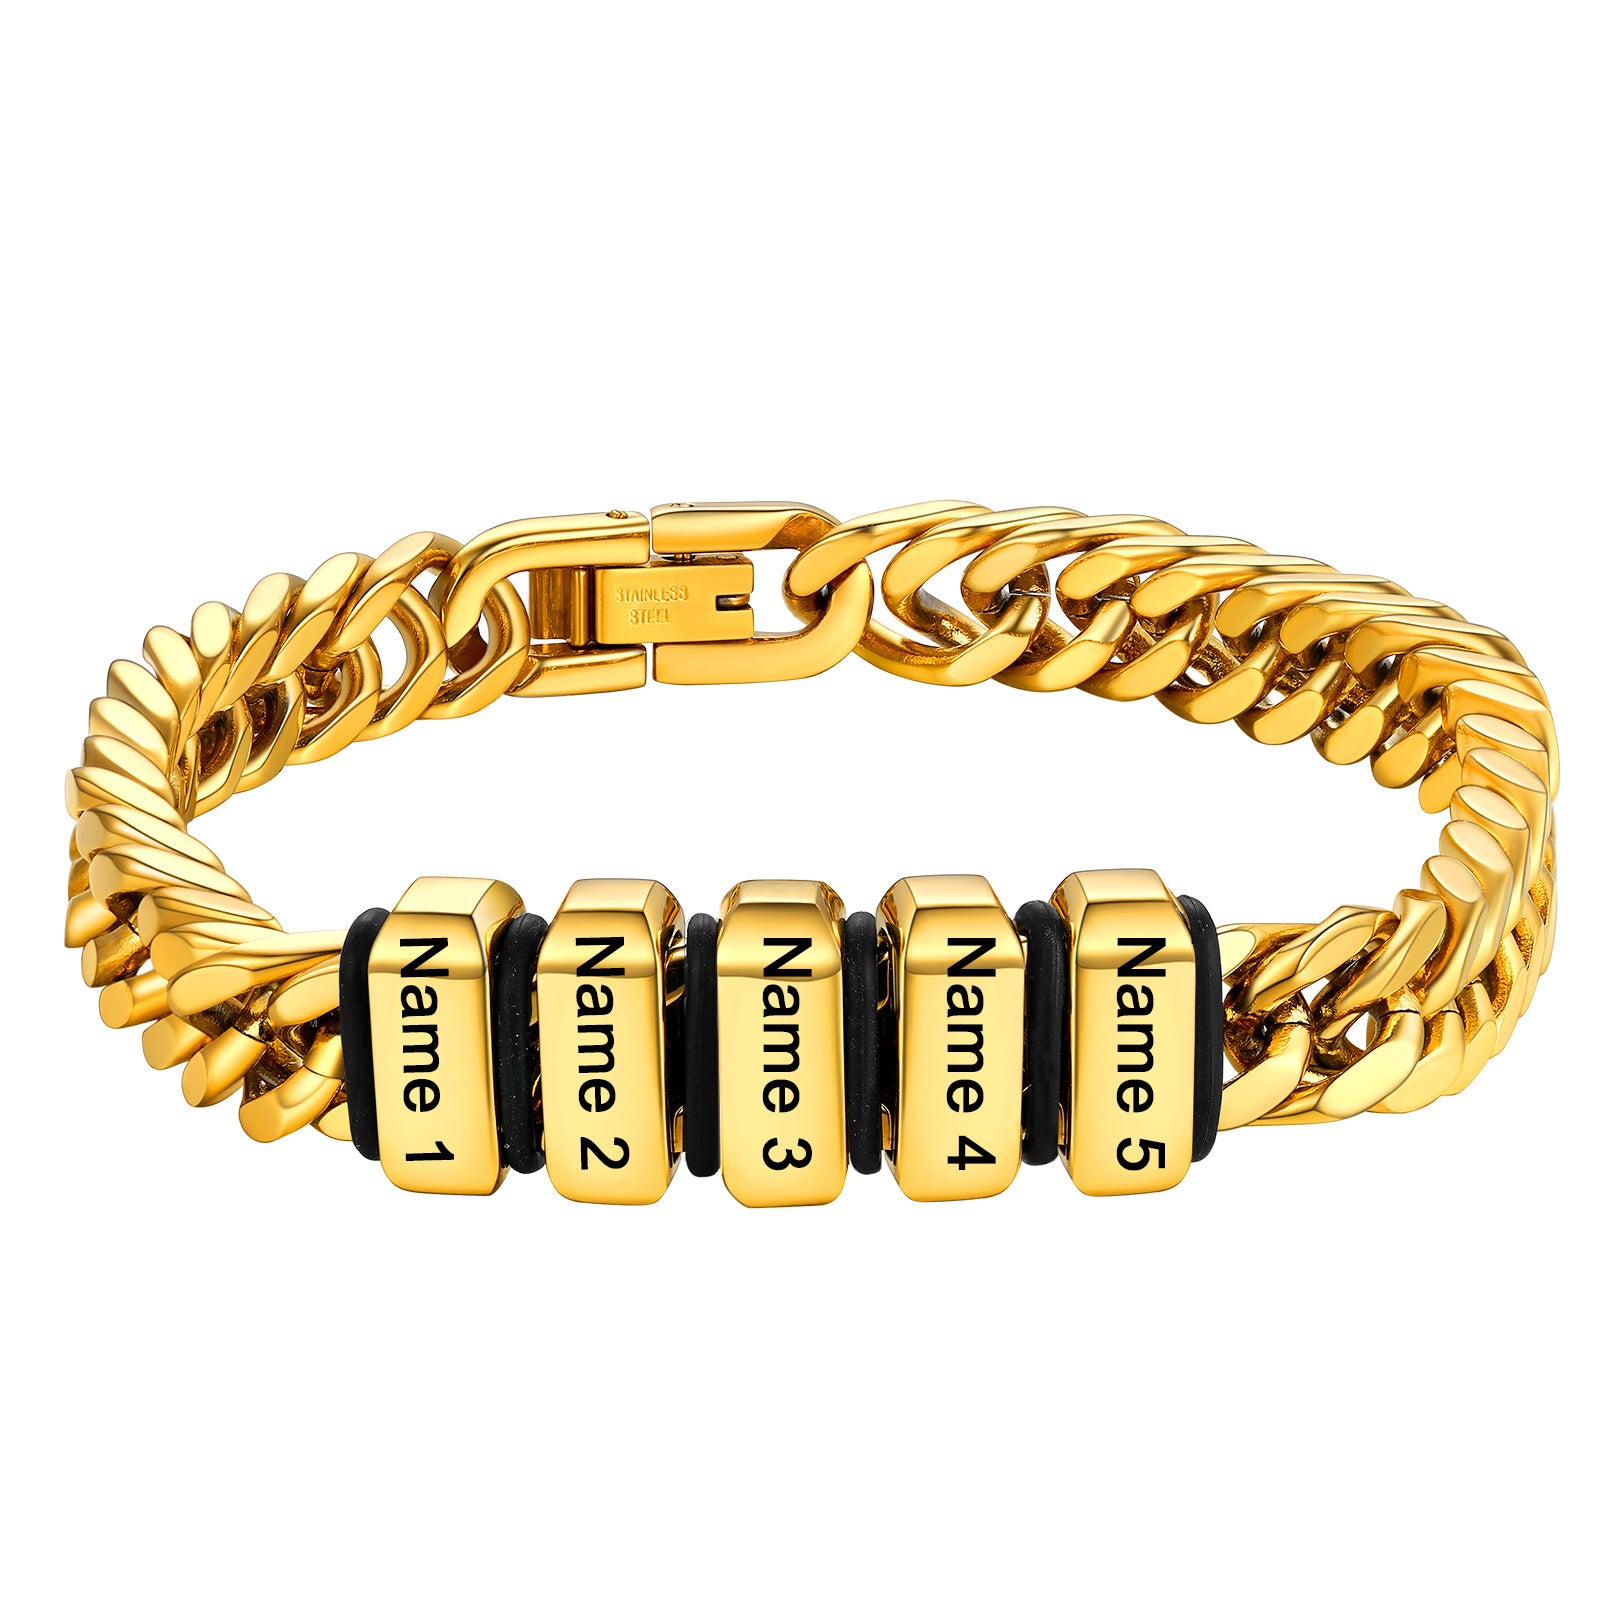 Personalized Engraving Cuba Chain Bracelet for Men Gold Plated